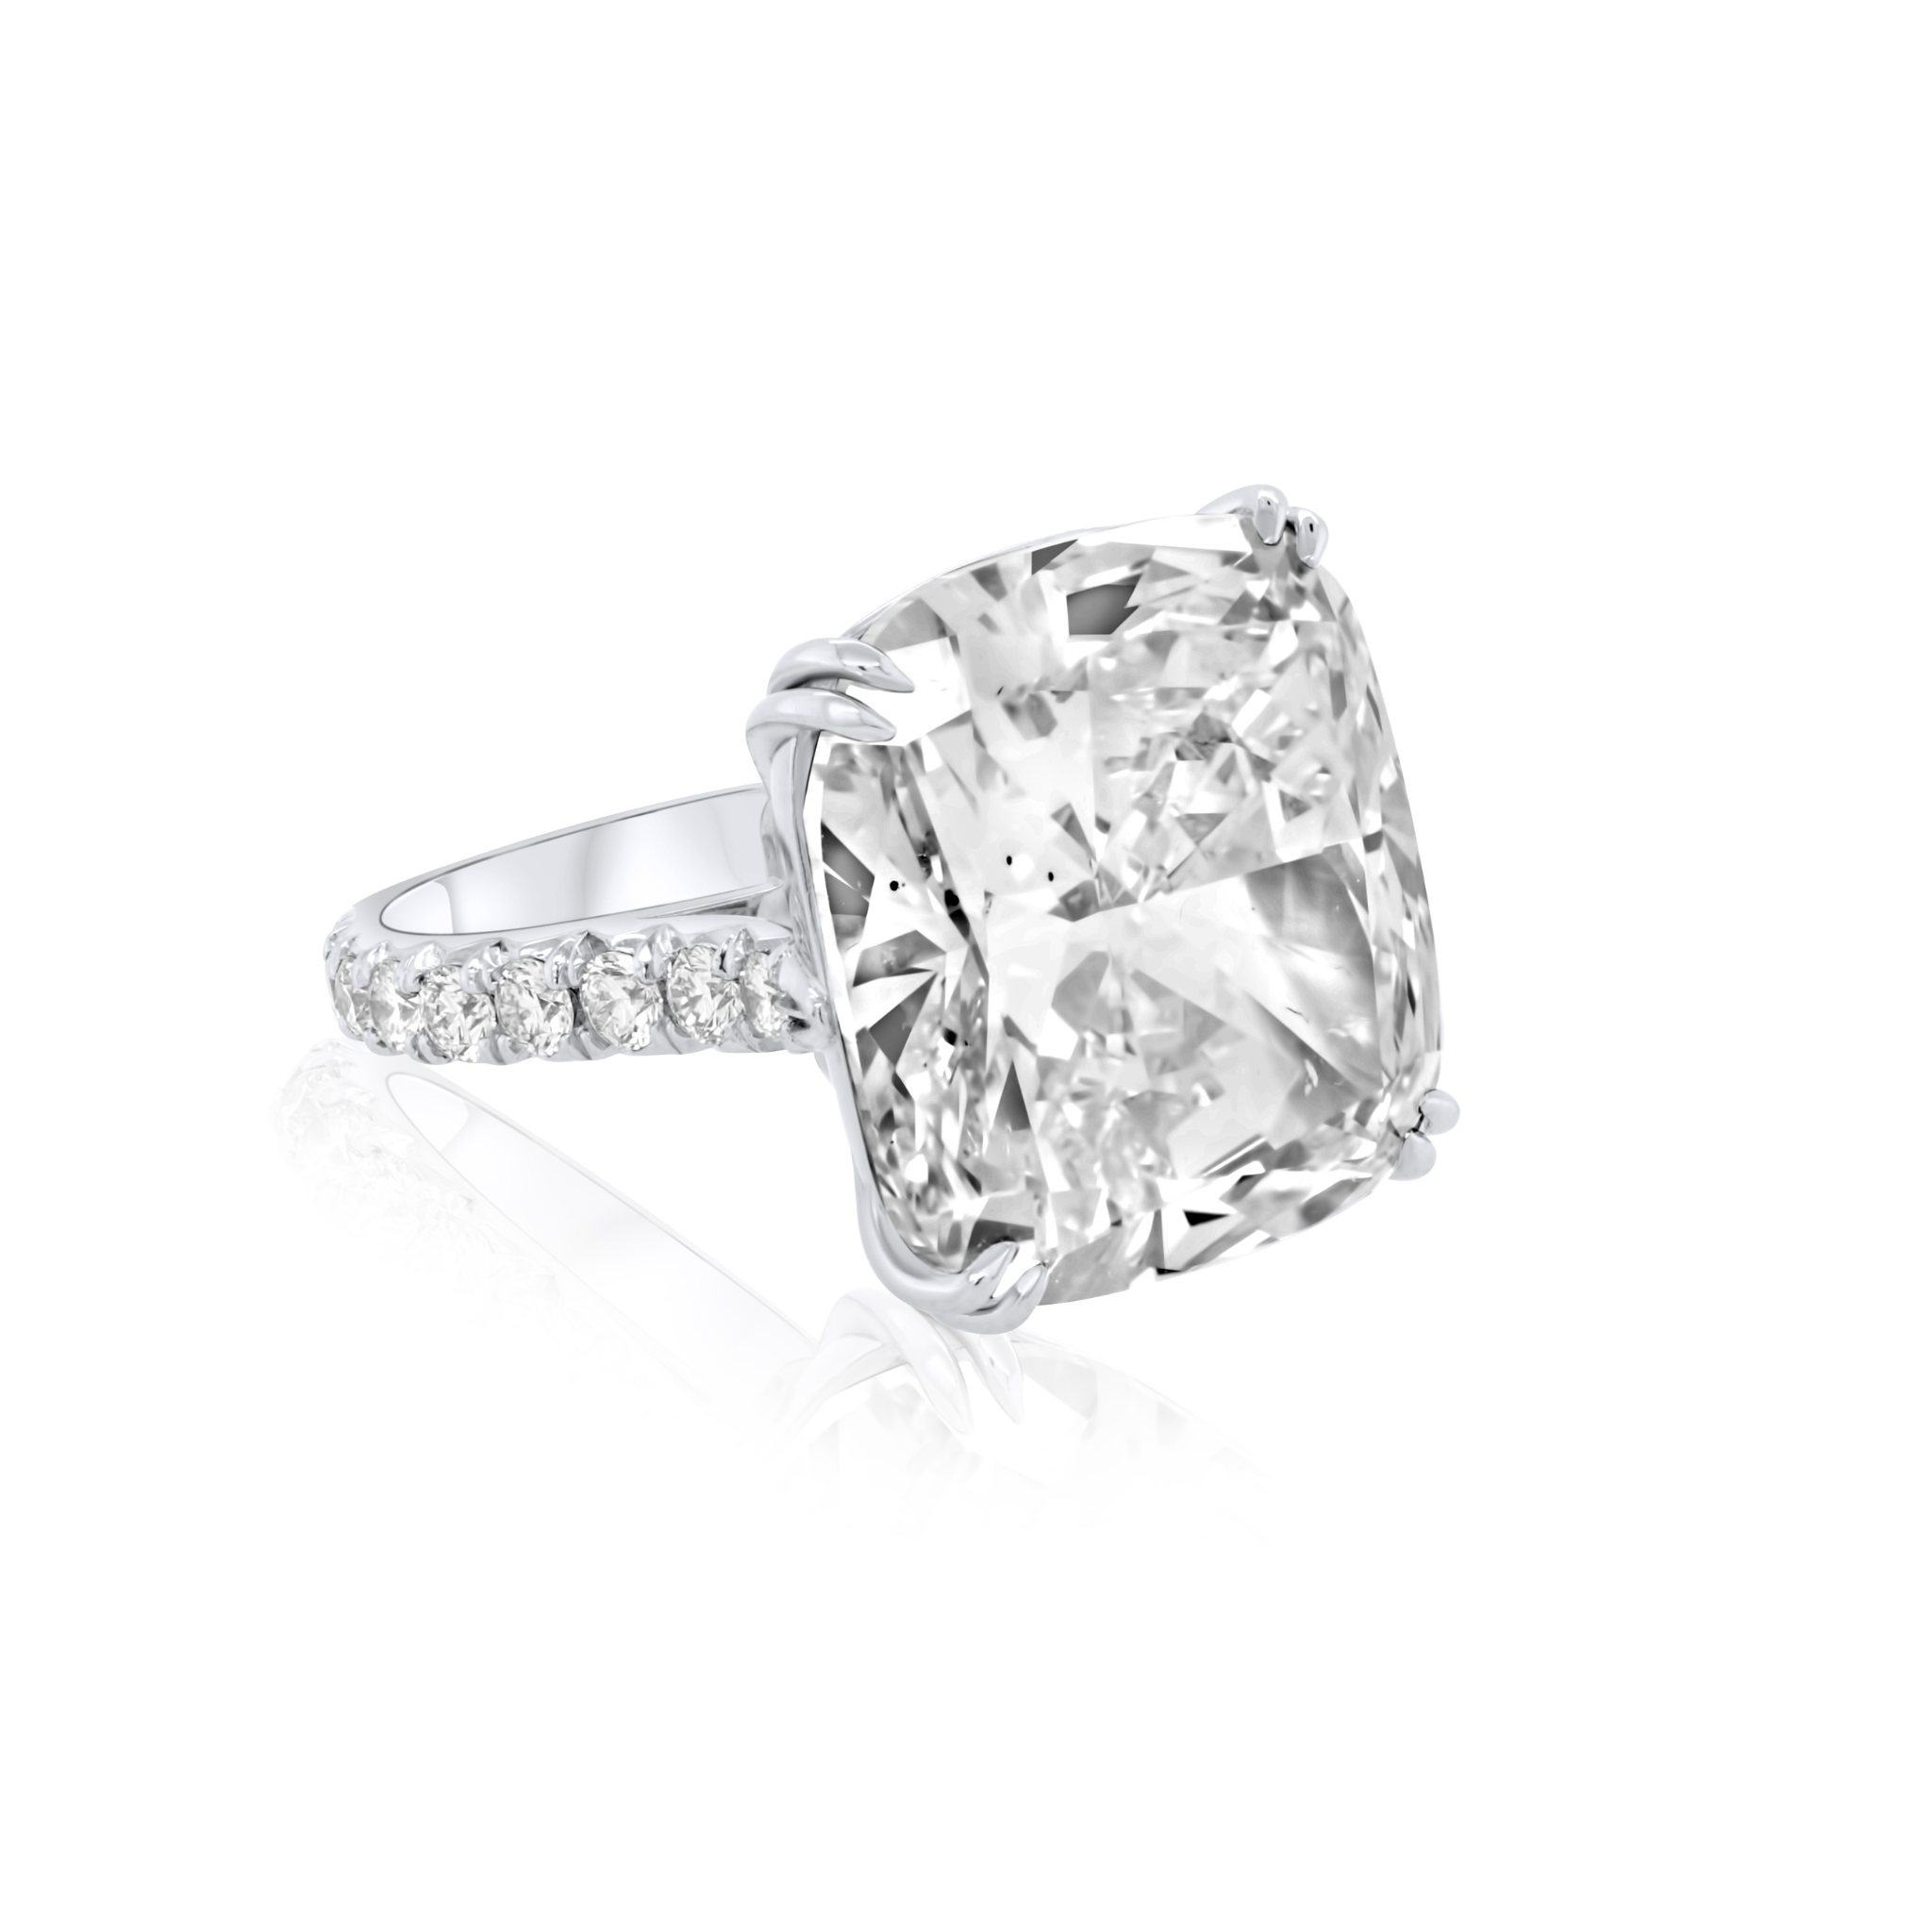 cushion cut diamond ring with side stones